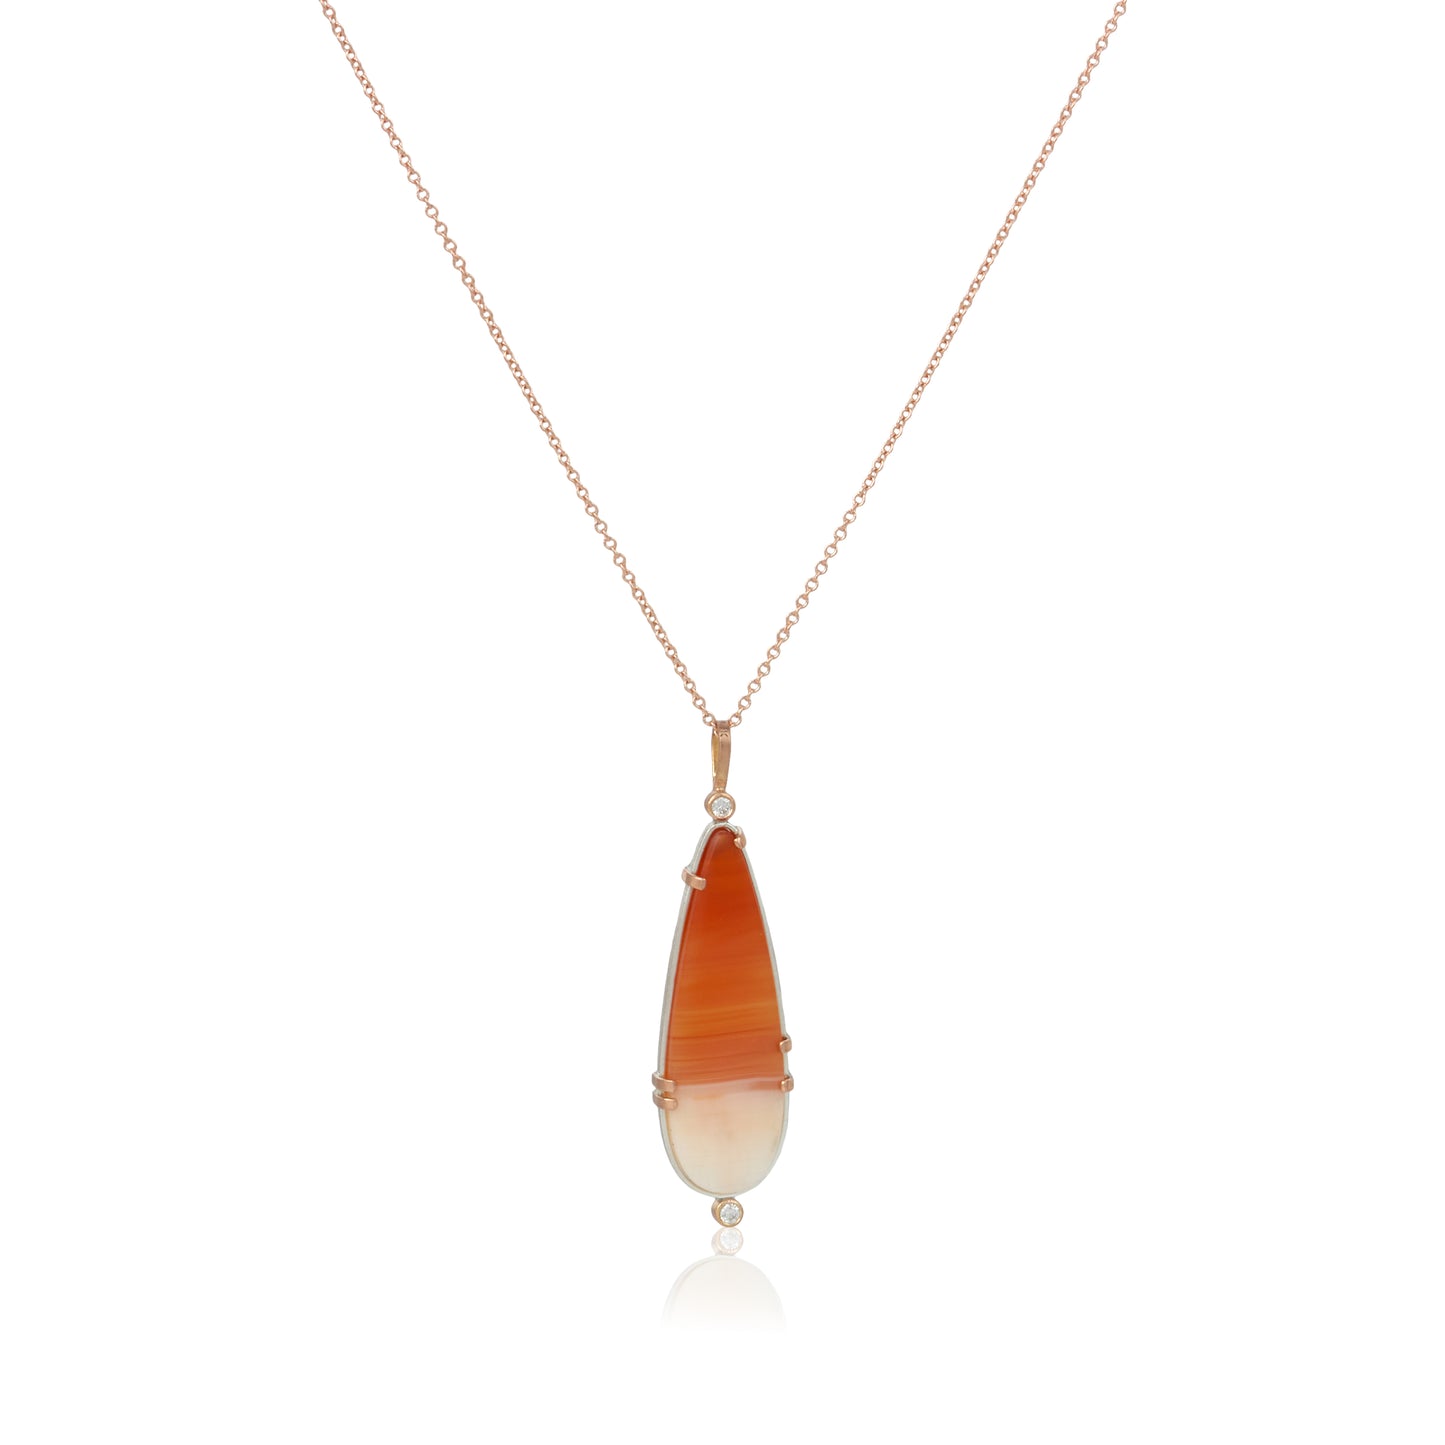 Rose gold carnelian and diamond necklace with rose gold chain by Karin Jacobson